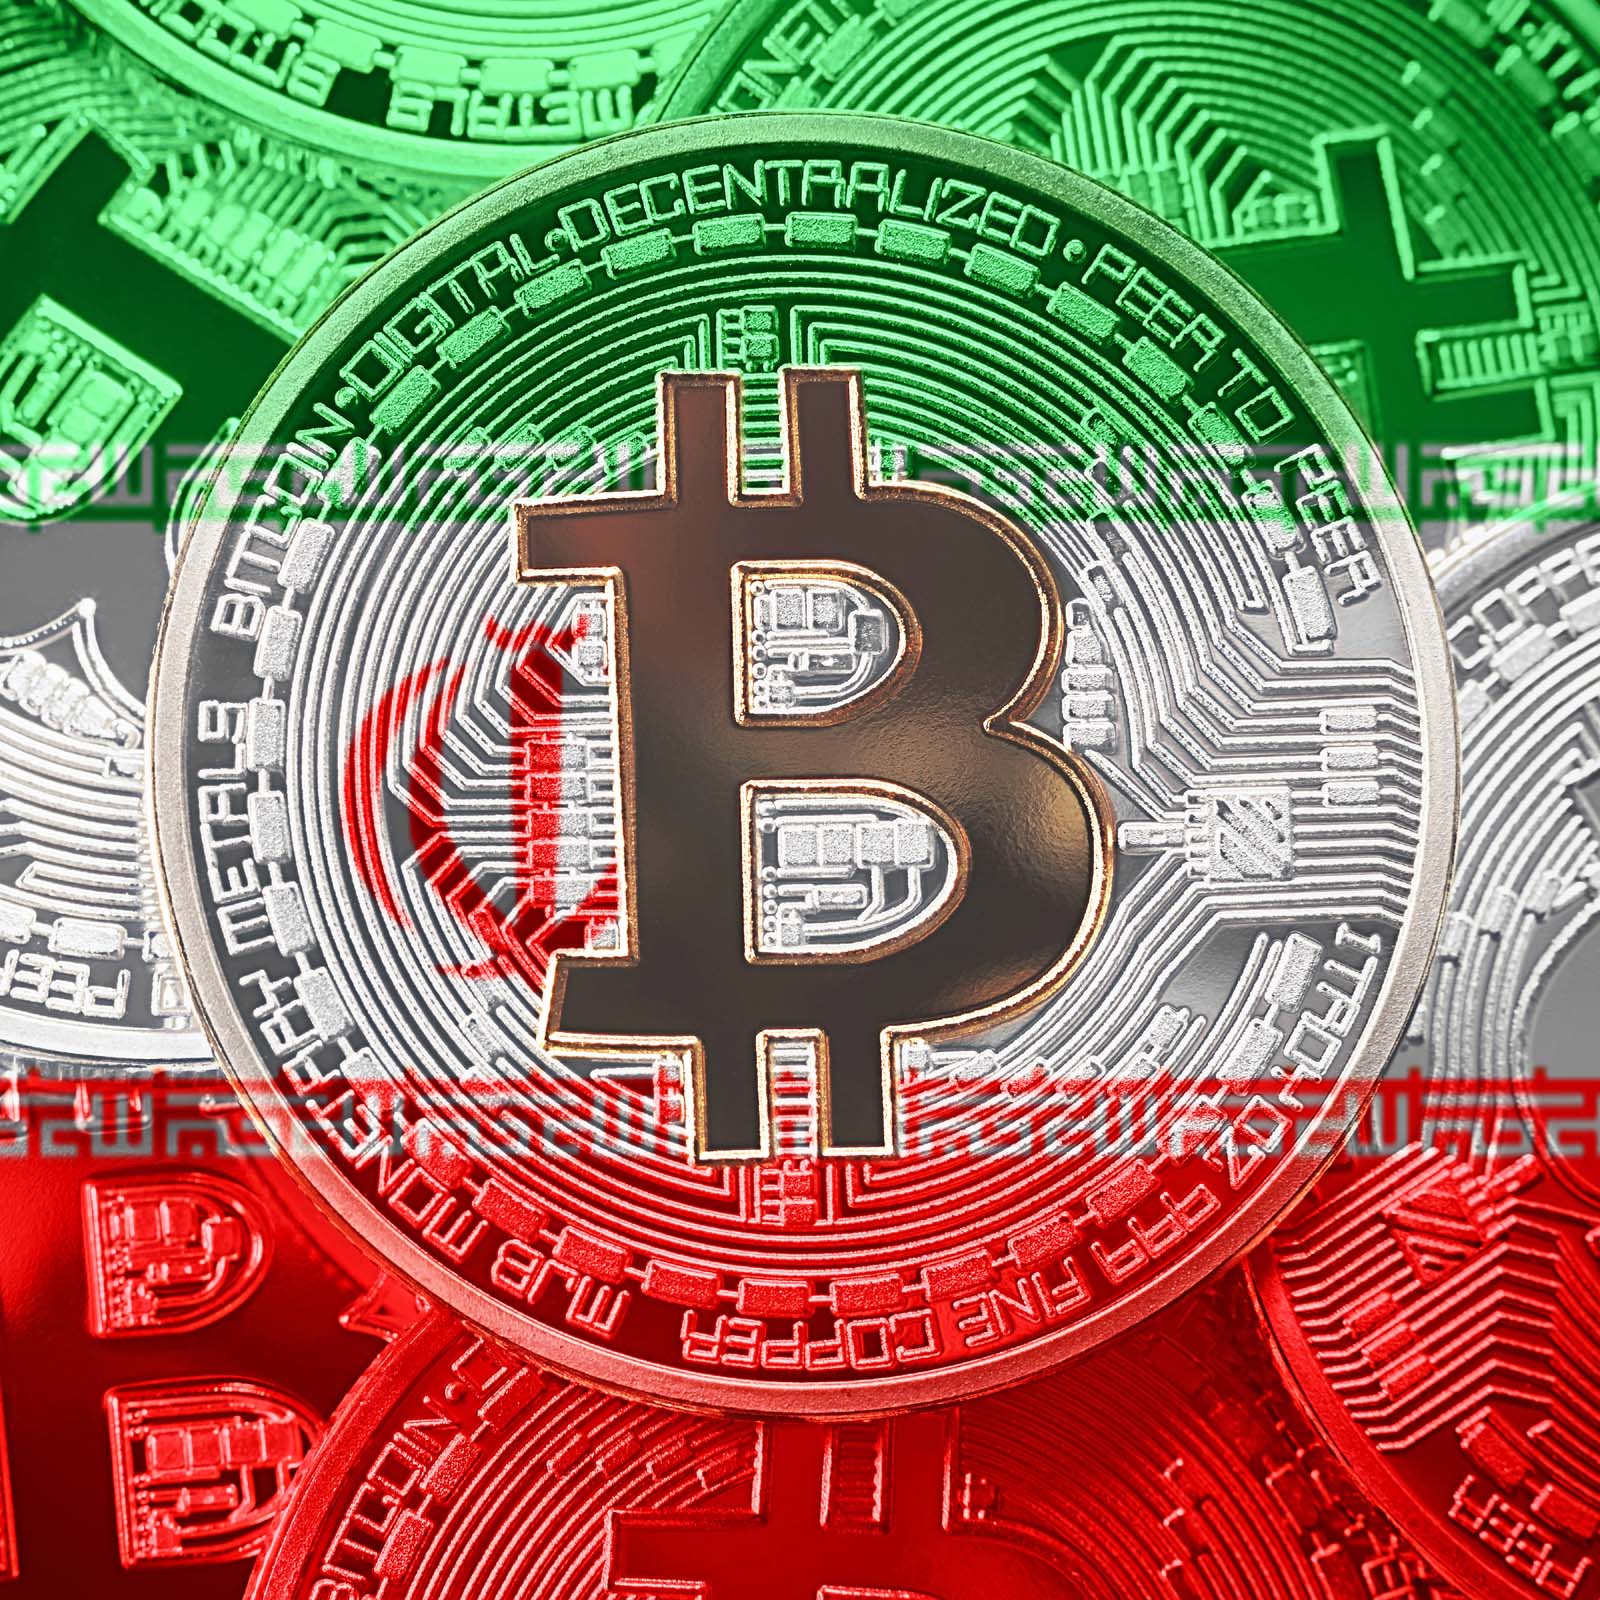 Iran Considers Using Cryptocurrencies to Evade US Sanctions